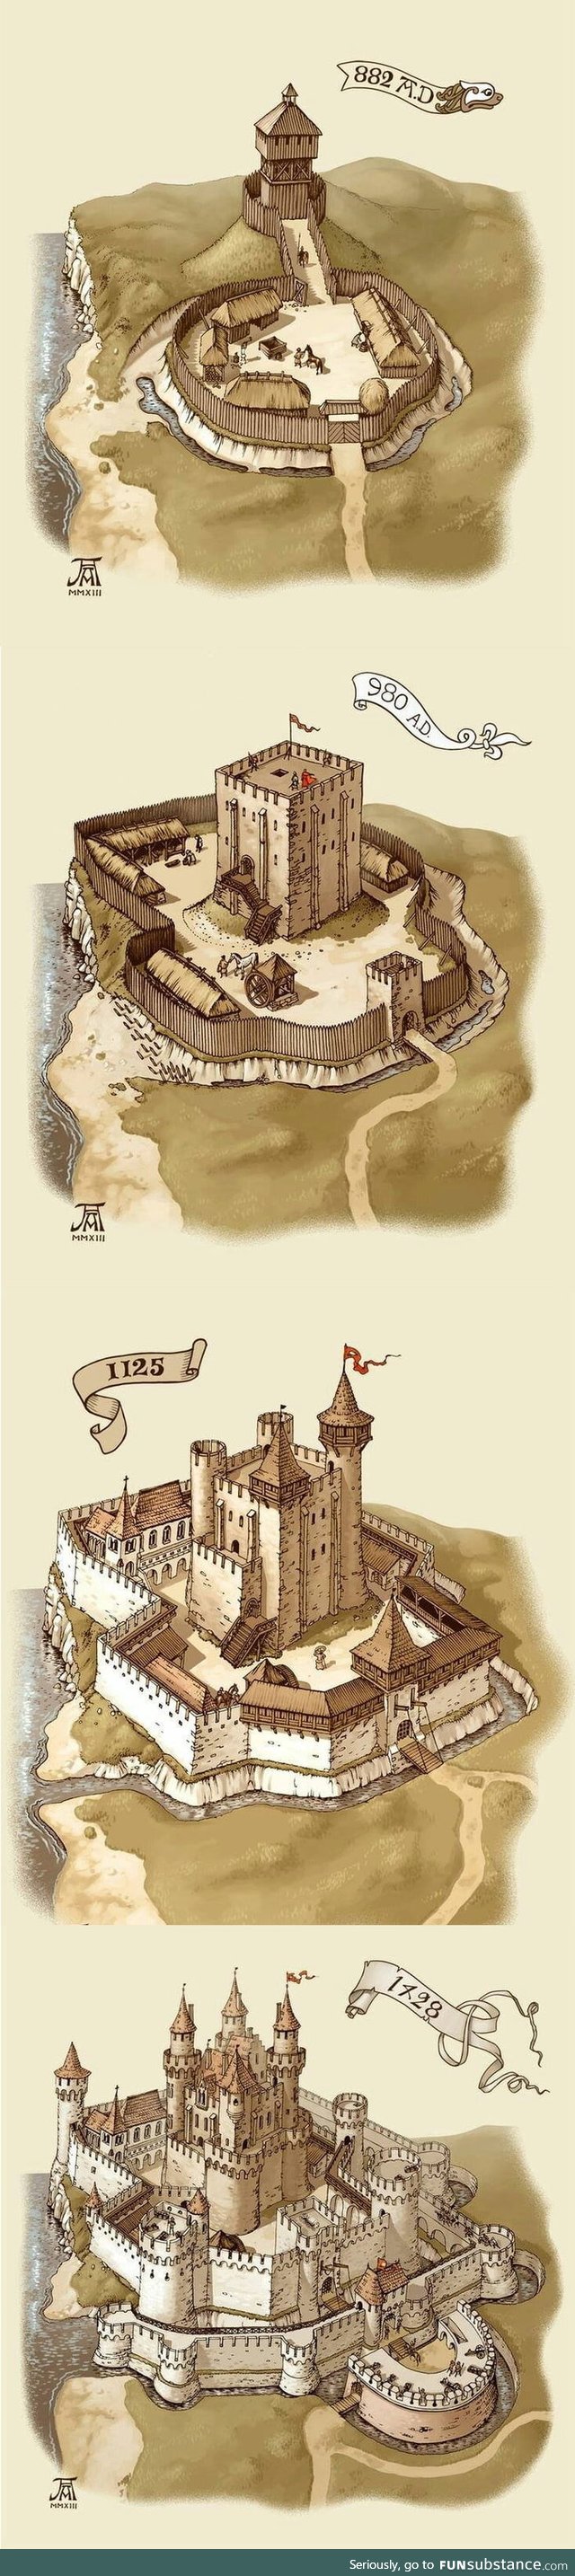 Evolution of castles throughout the ages